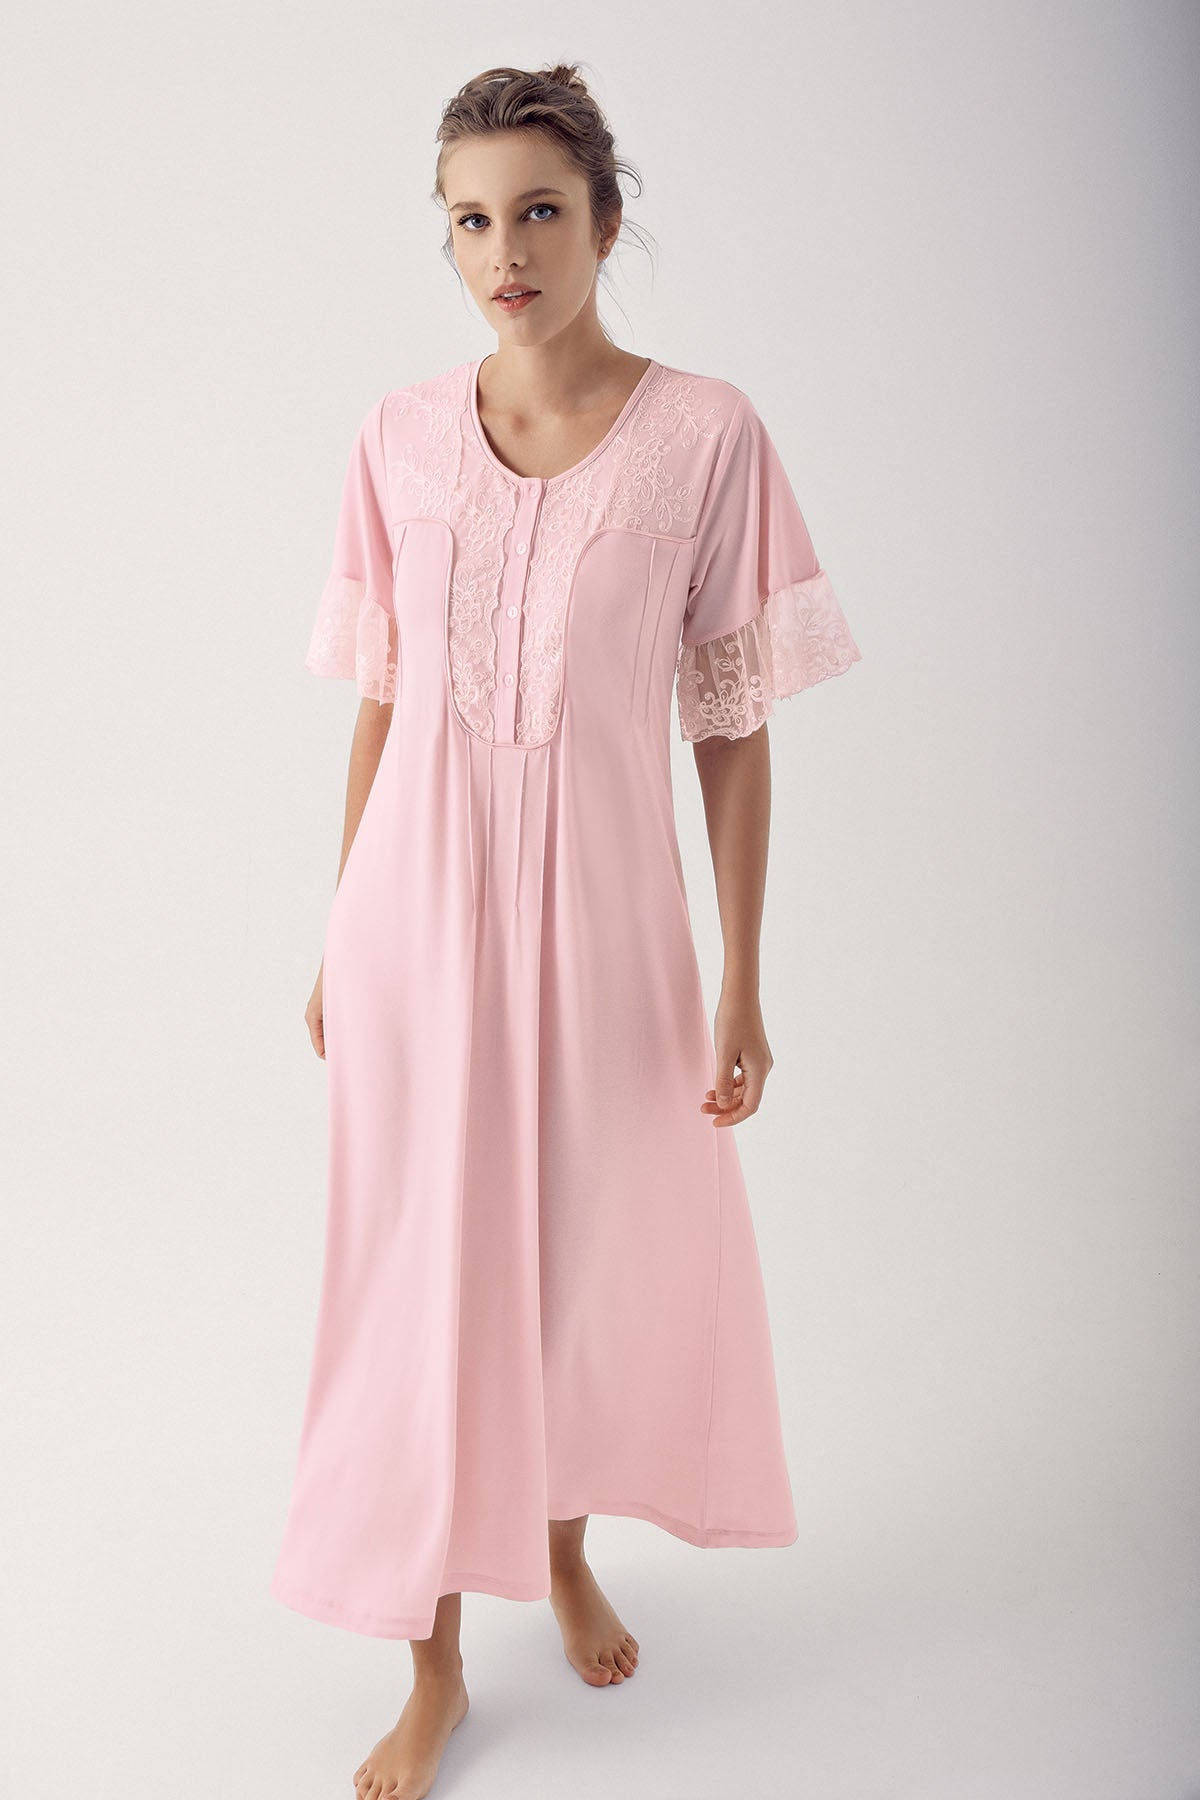 Collar And Sleeve Lace Maternity & Nursing Nightgown Powder - 14105